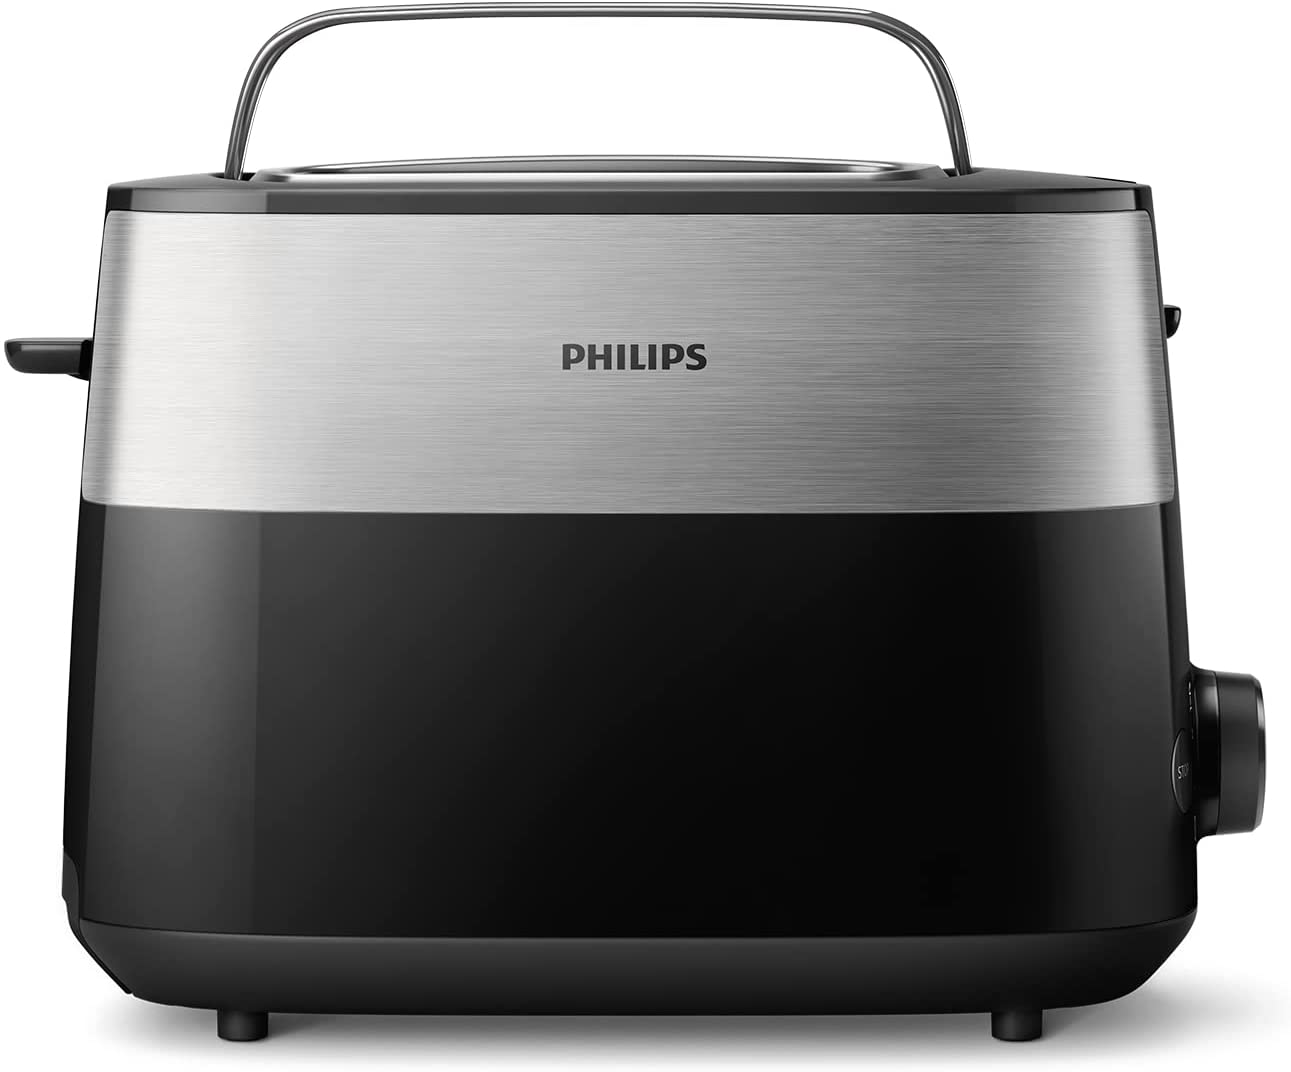 Philips HD2516/90 Toaster (830 W, 8 Browning Levels, Bun Attachment, Stop Button, Defrost and Warm-Up Function, Stop Button, Lift Function) Black/Stainless Steel